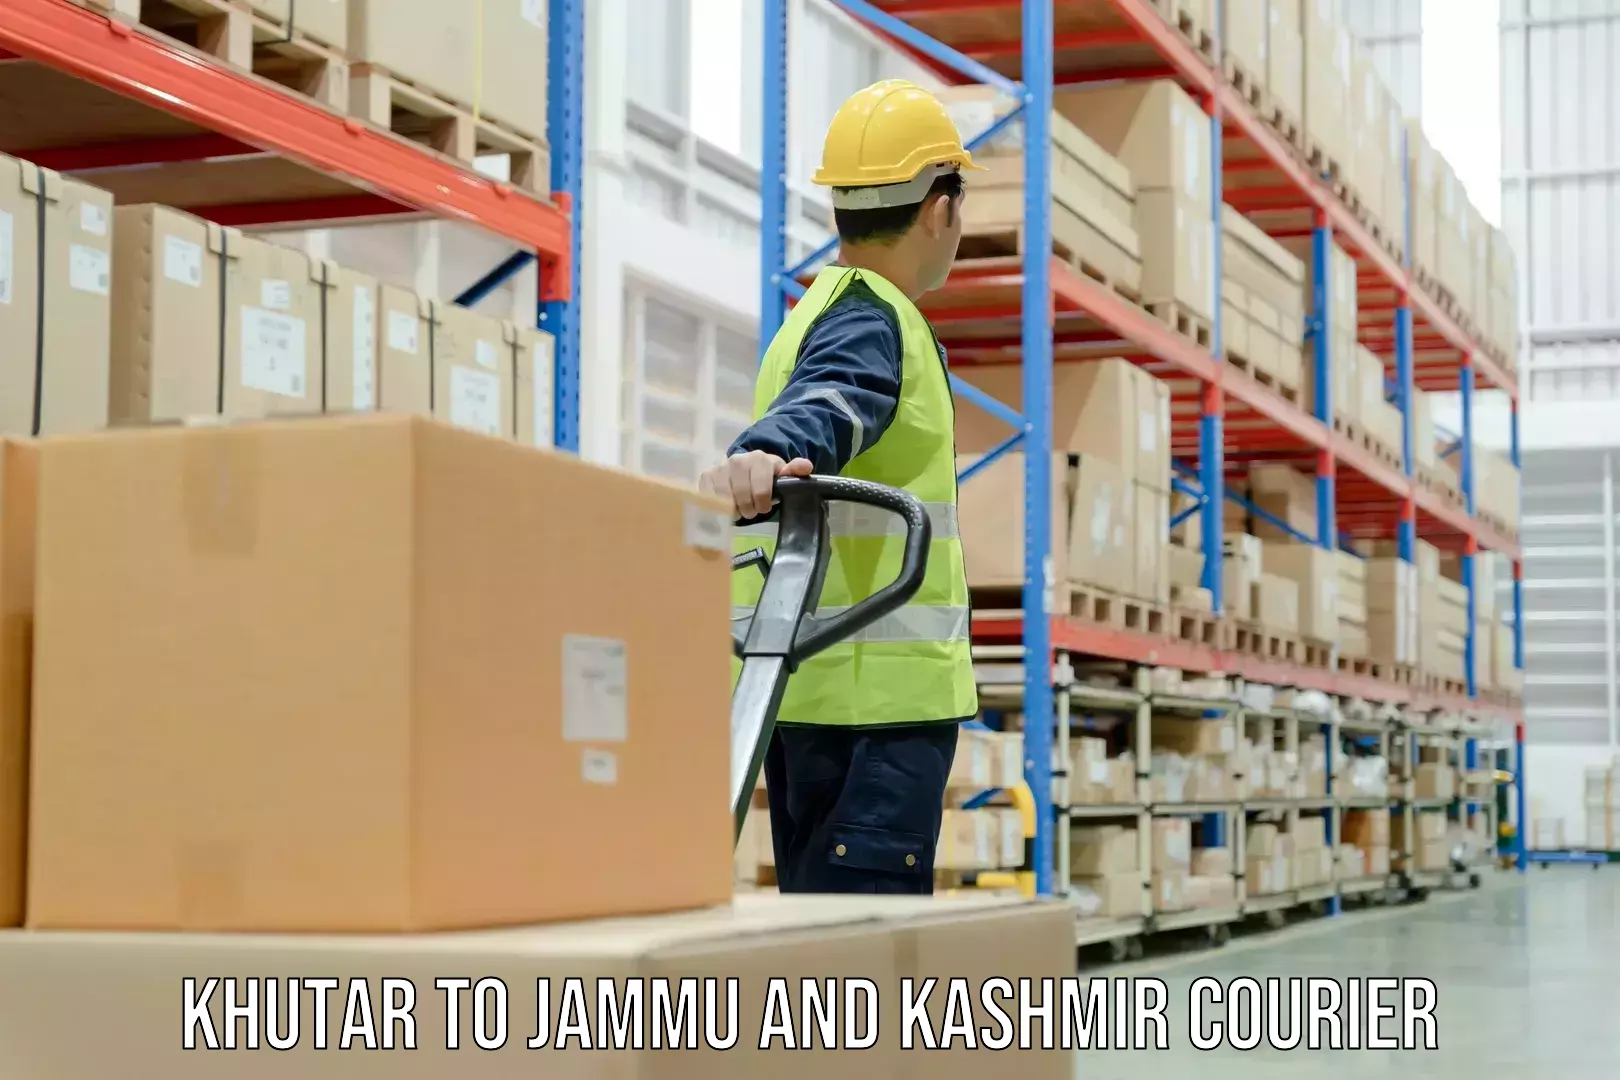 Speedy delivery service Khutar to Jammu and Kashmir